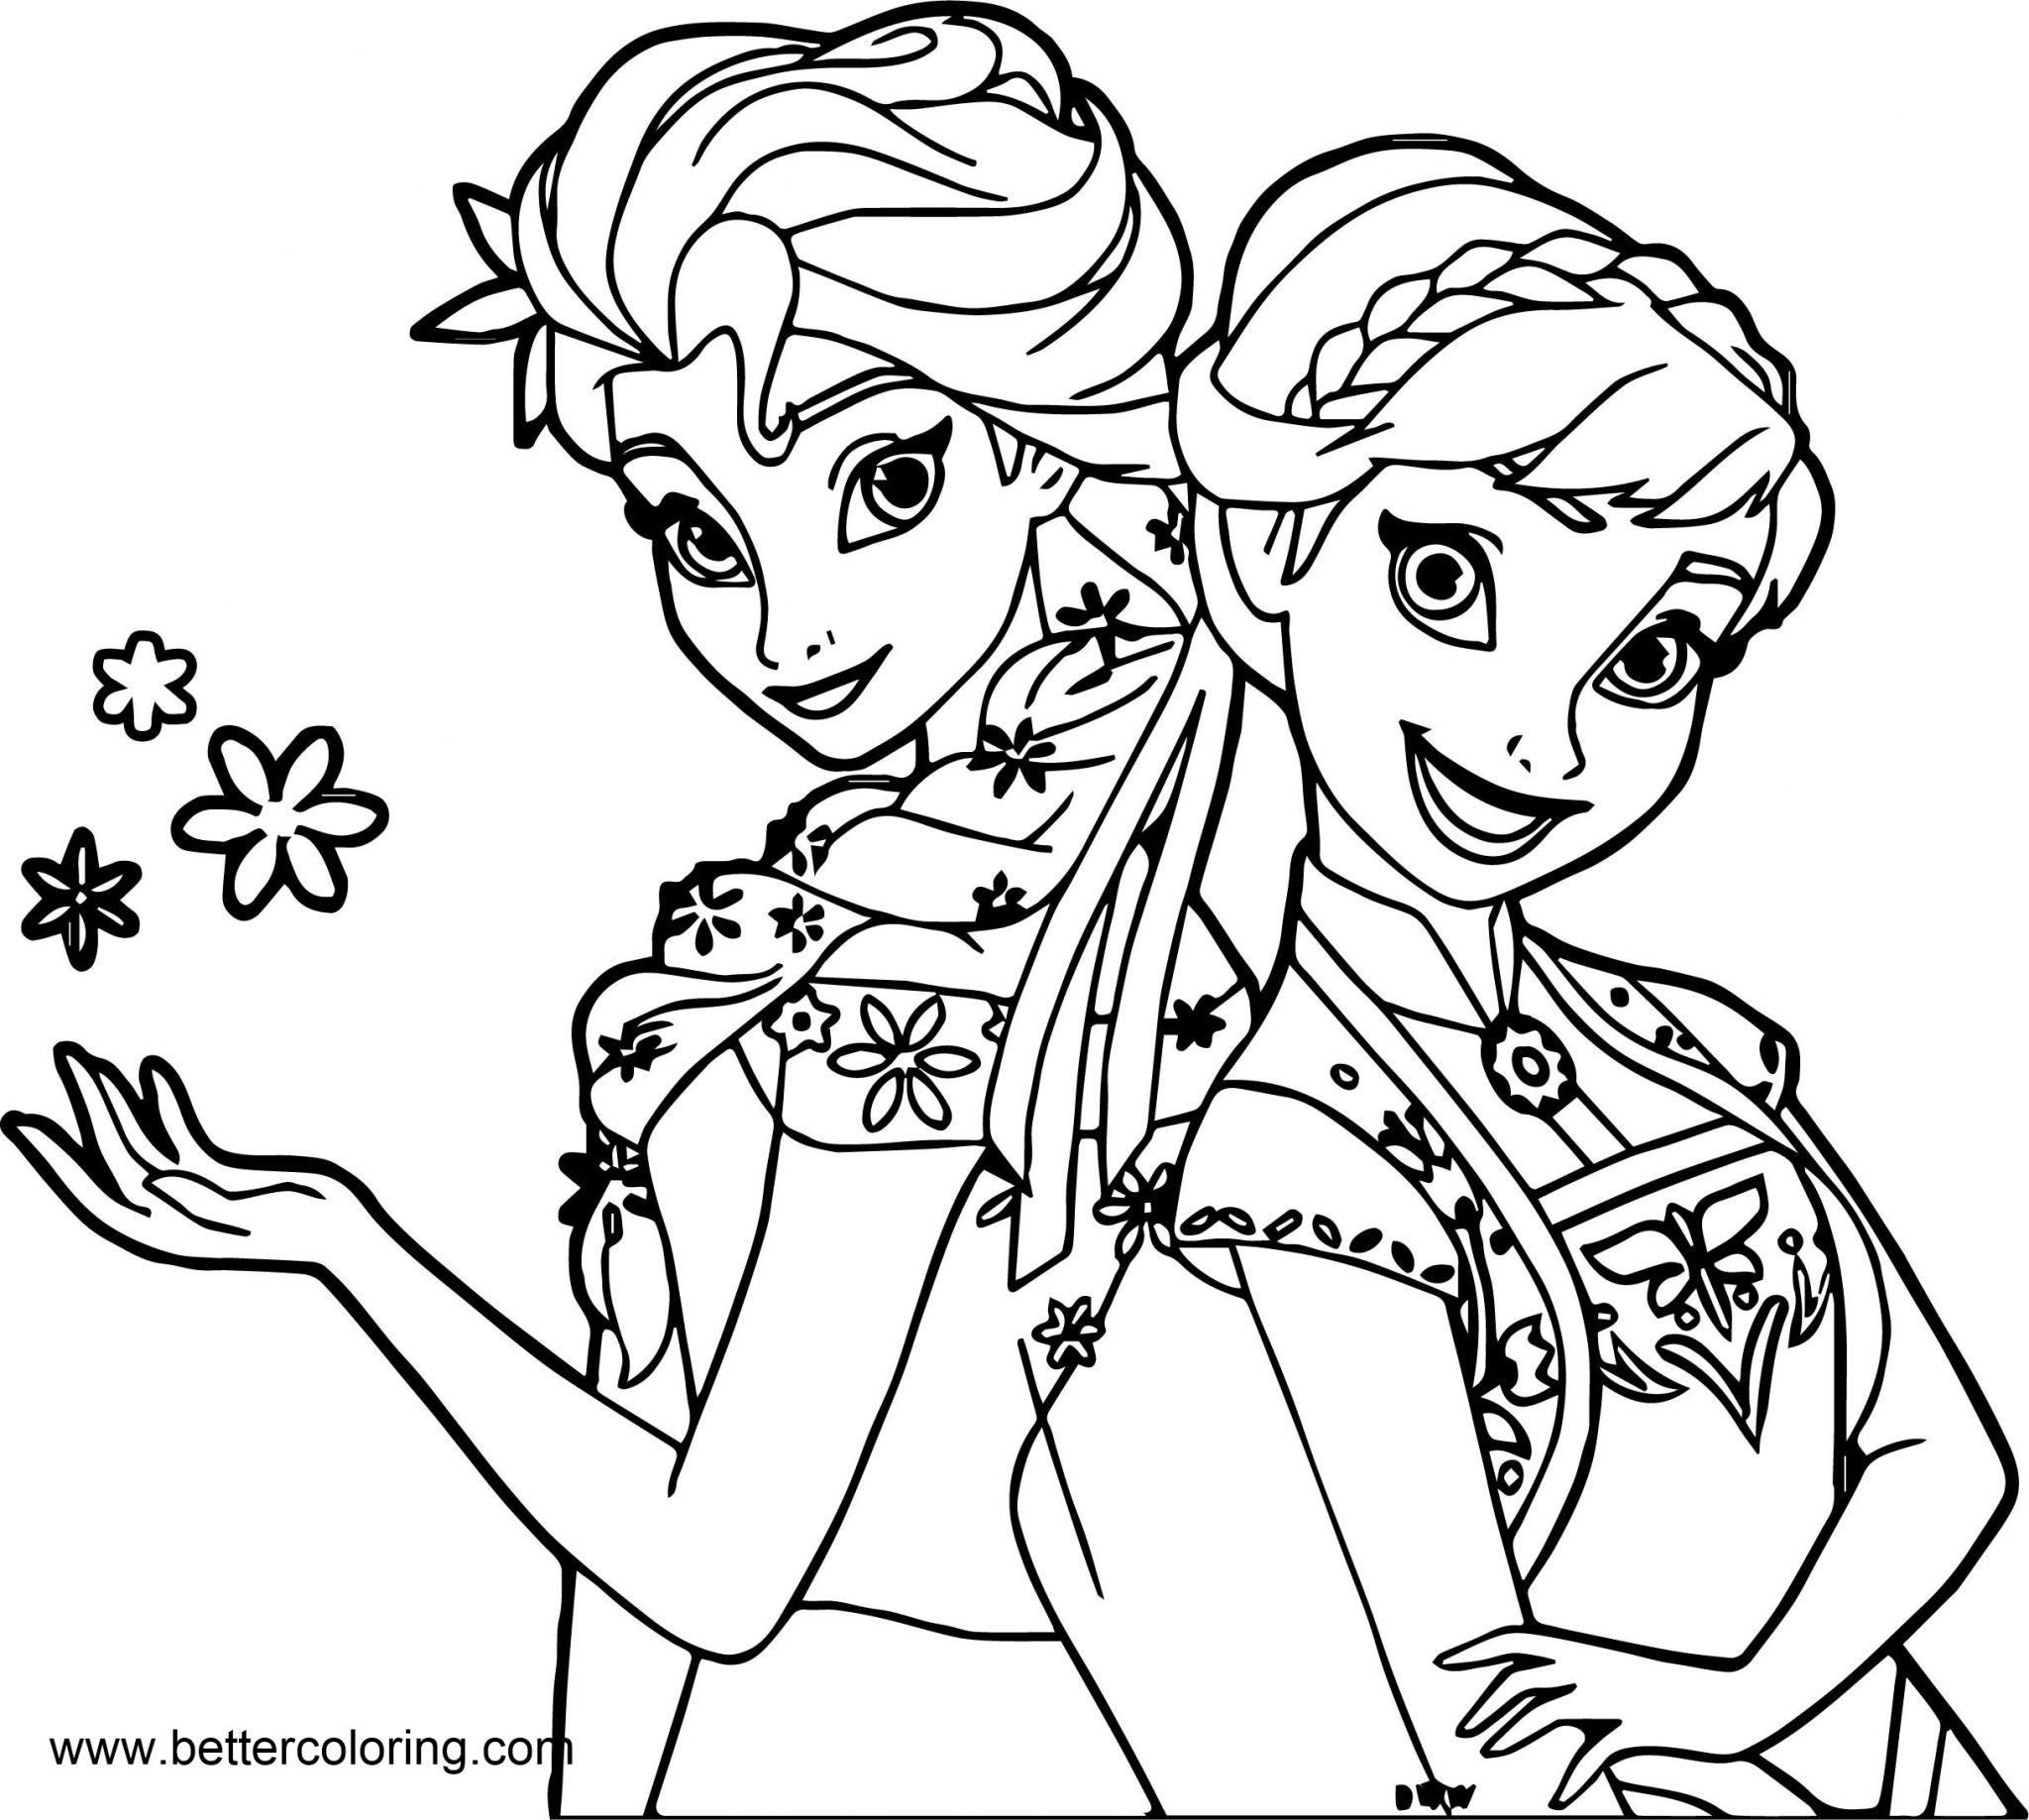 Coloring Pages : Bathroom Coloring Elsa Freemazing Photo And Anna ...